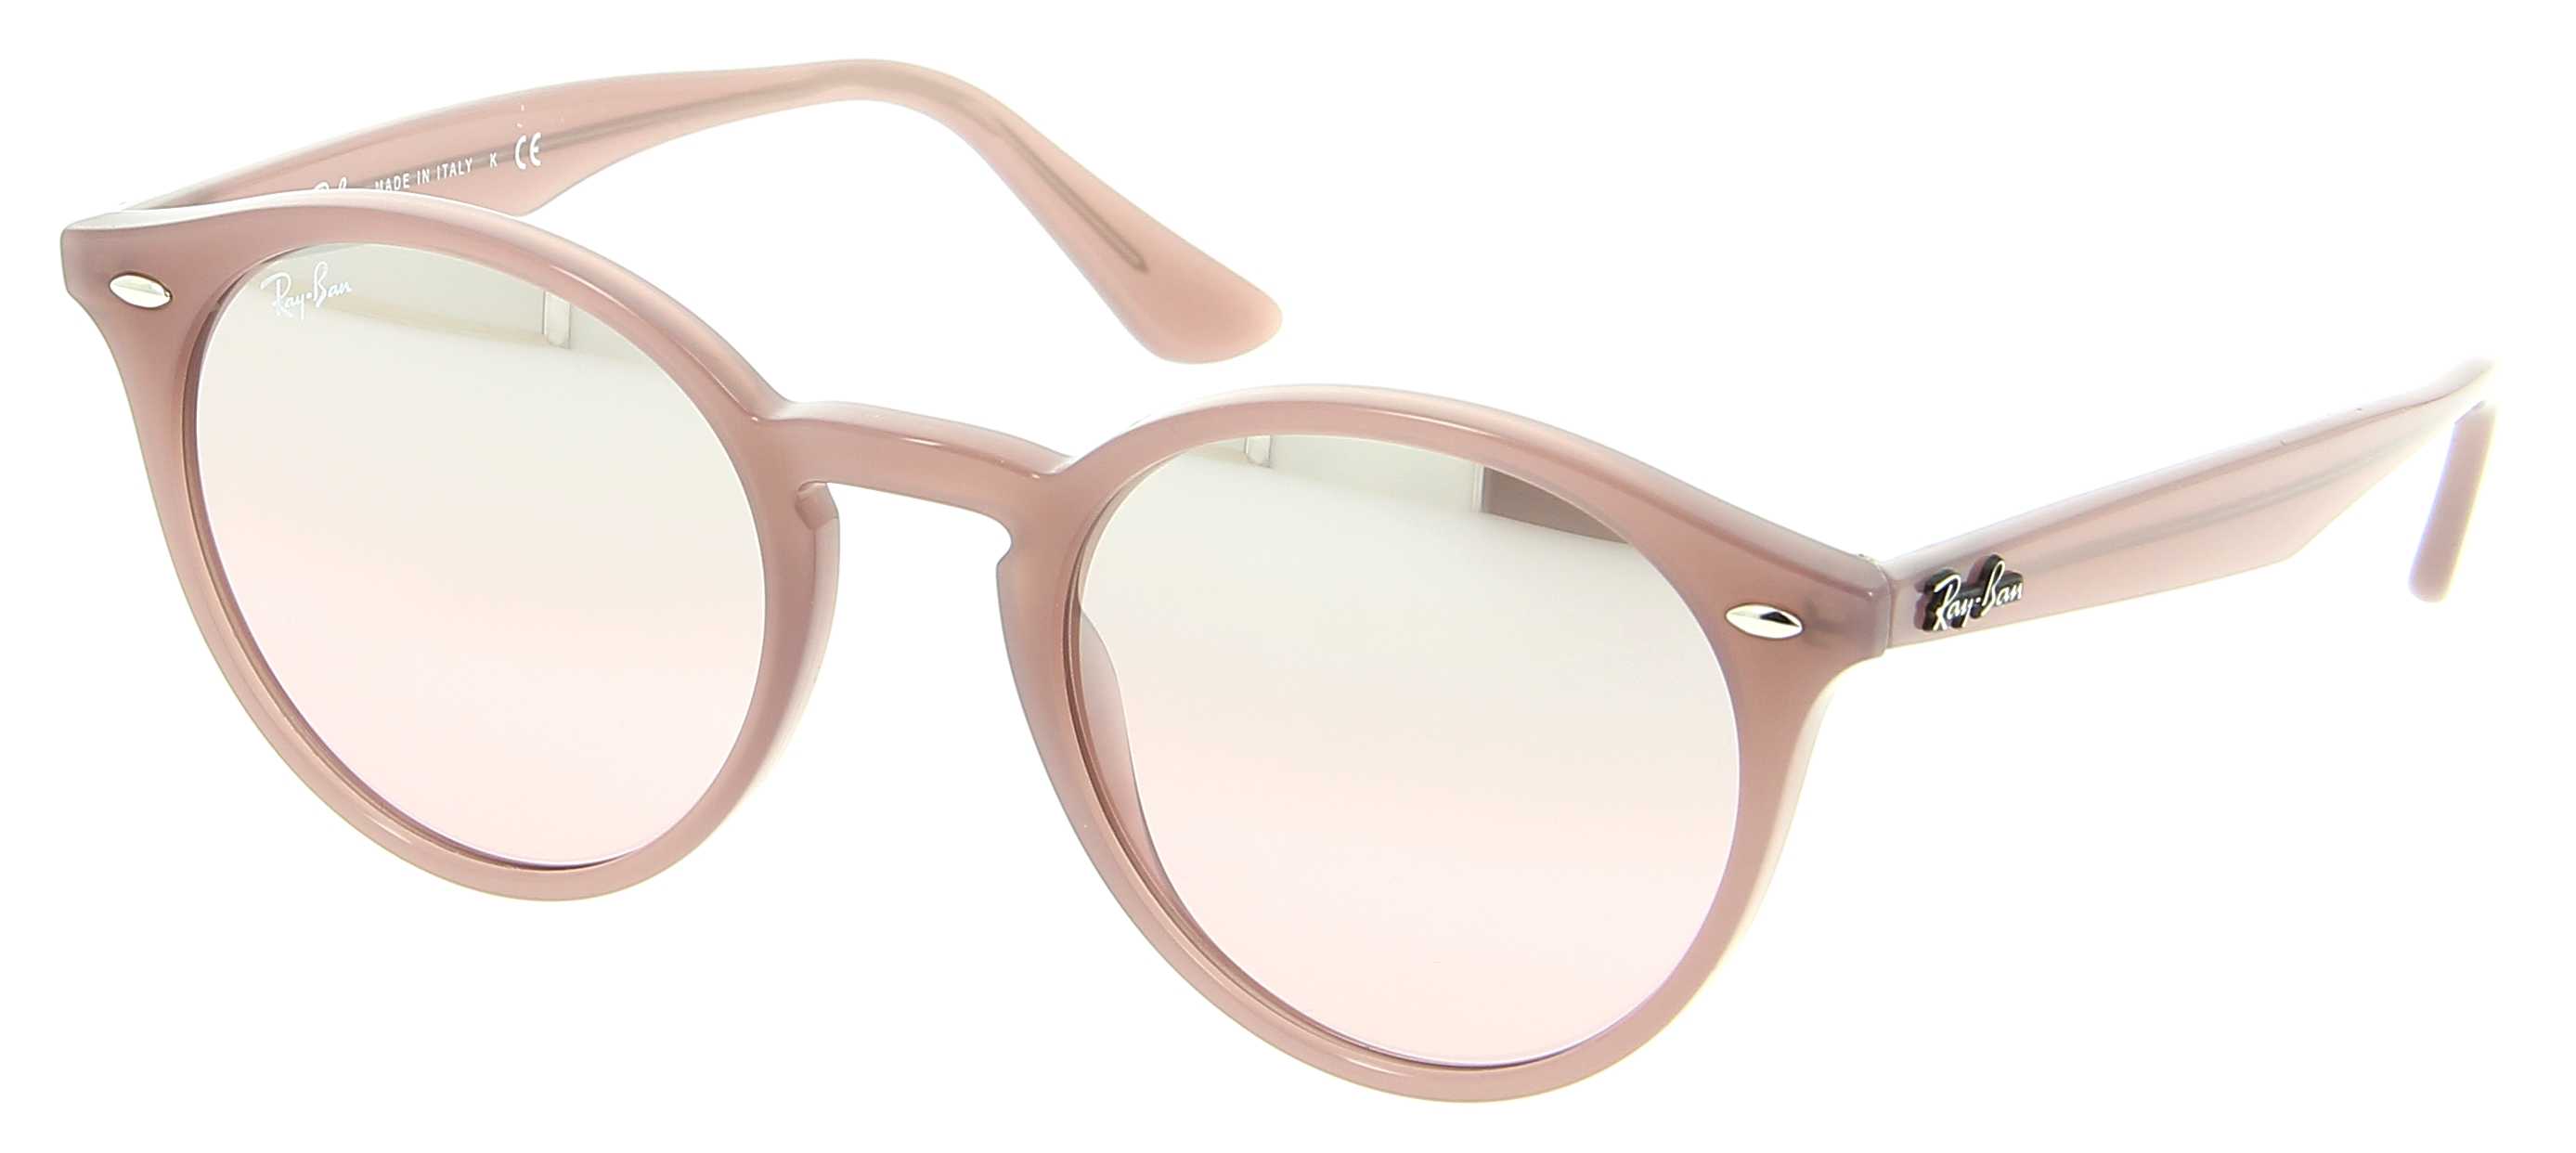 ray ban femme solaire rose